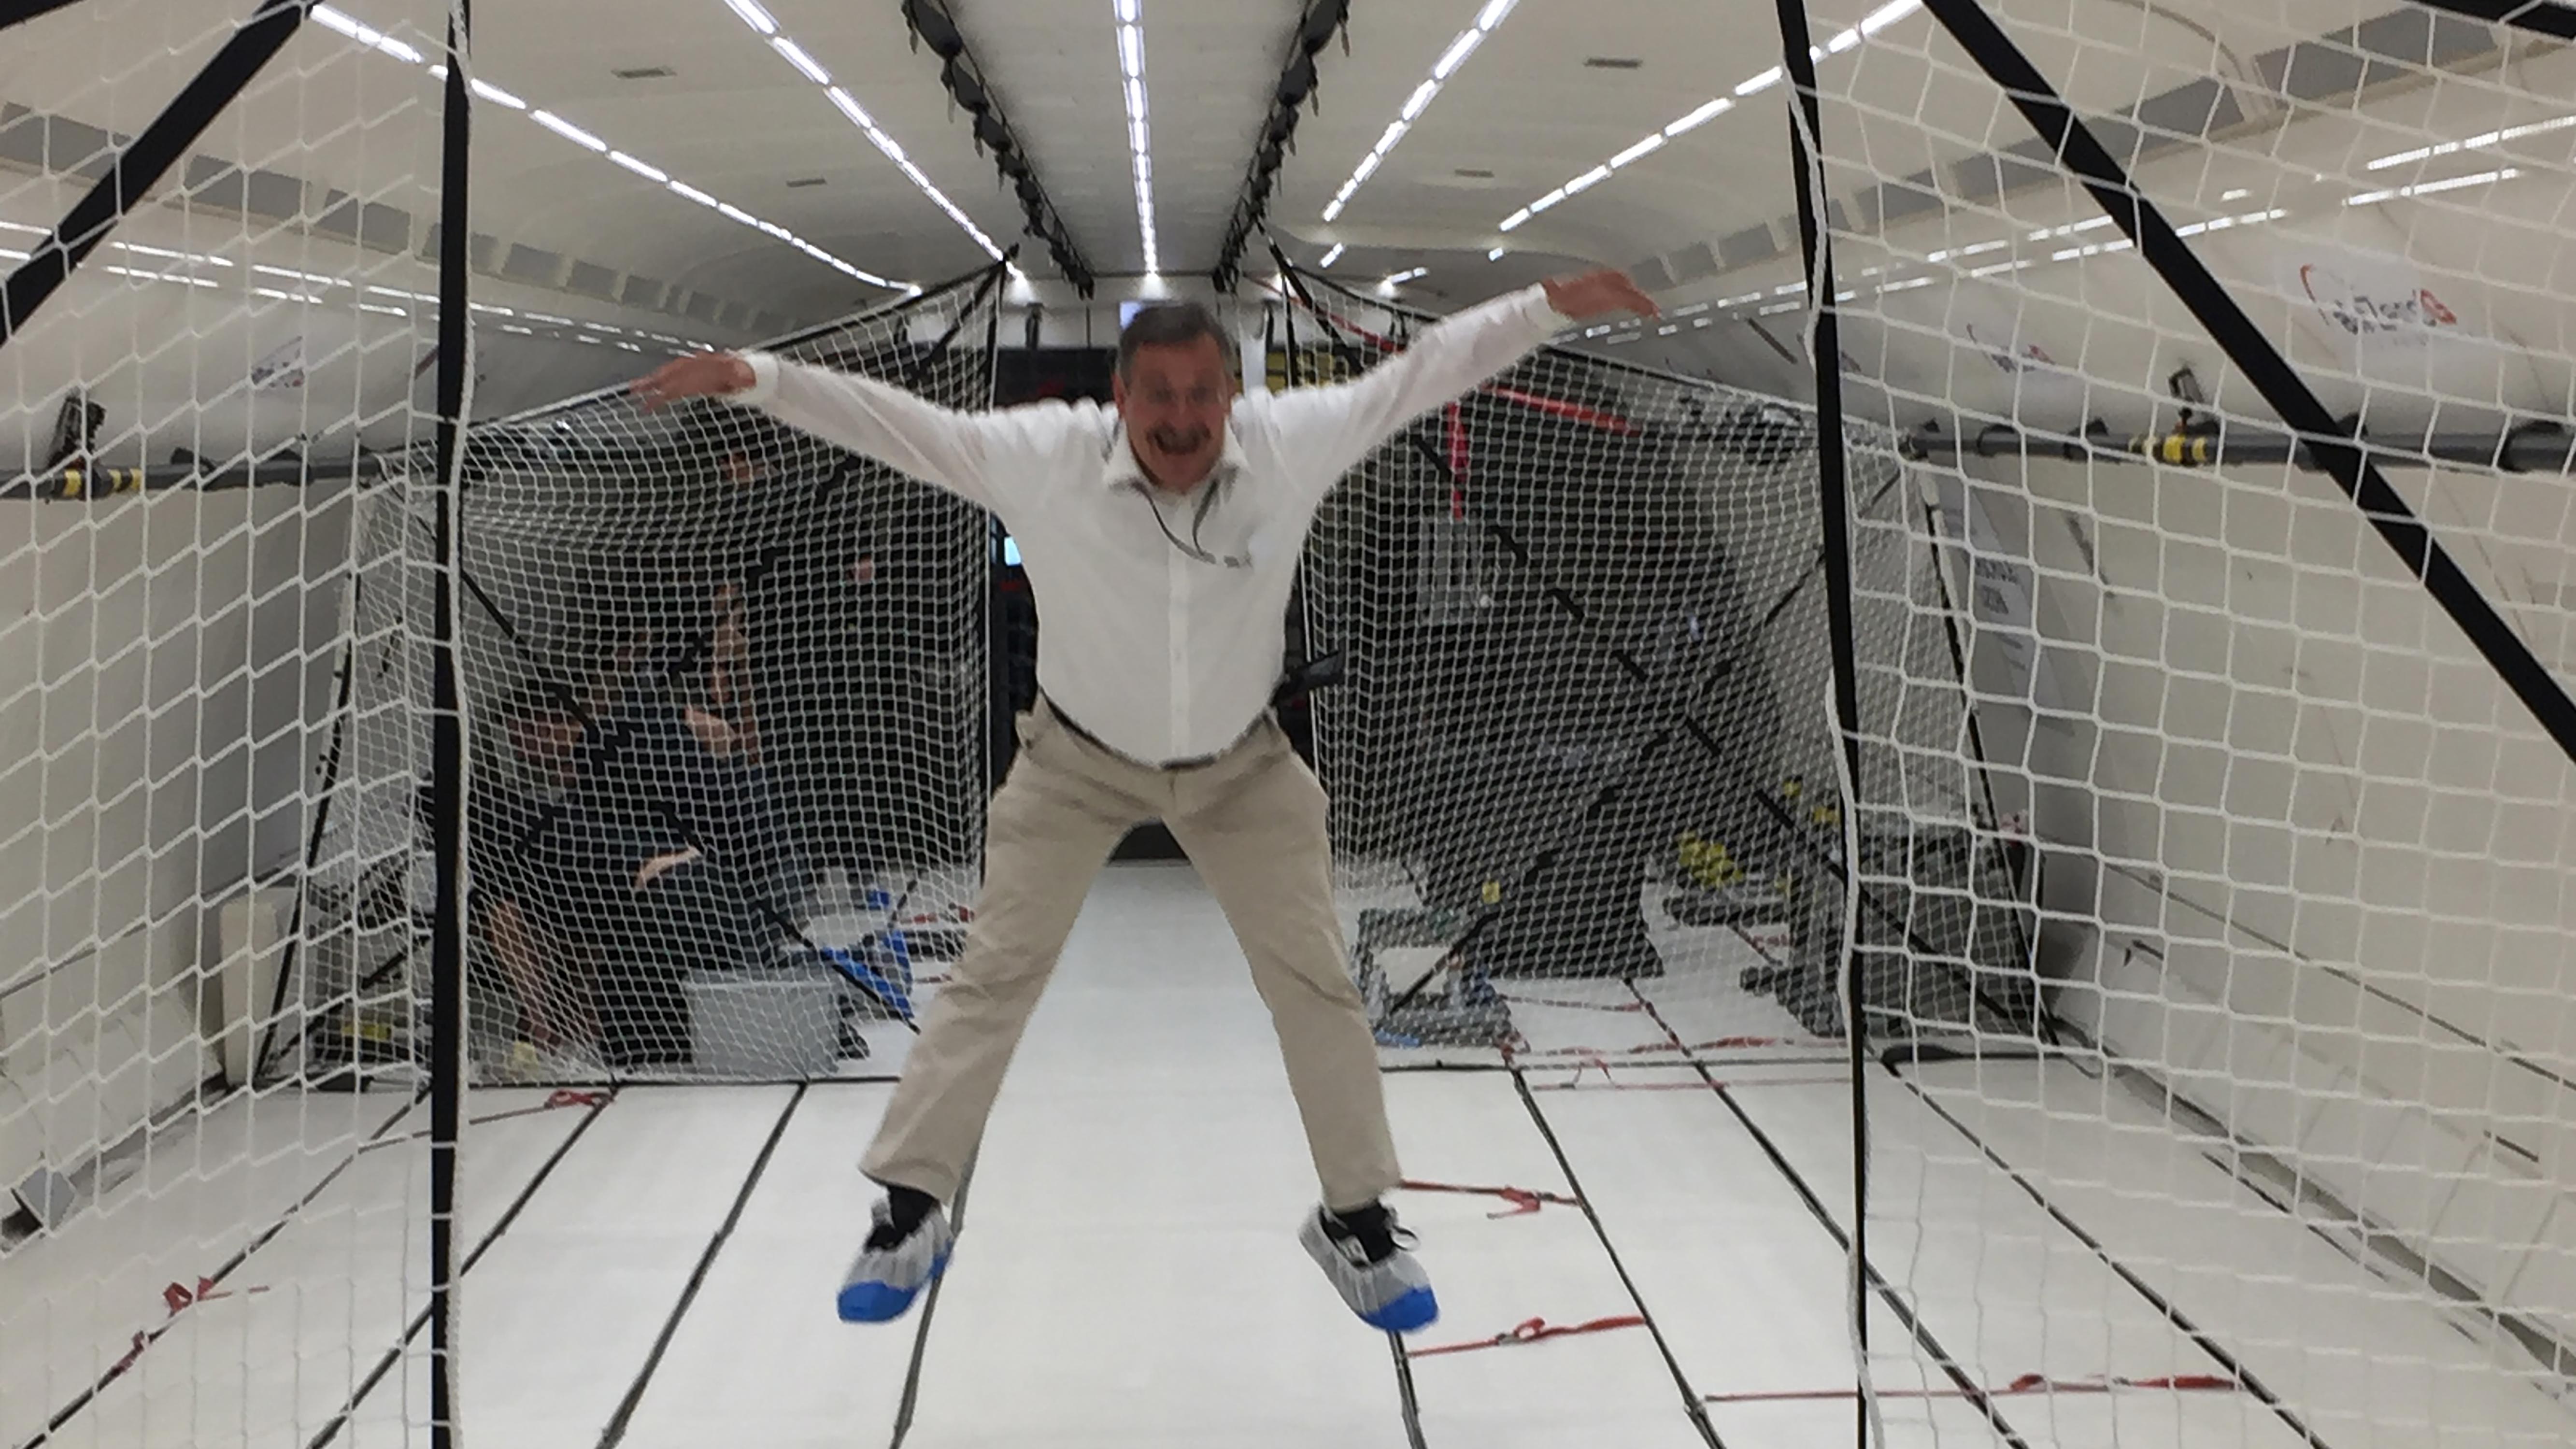 Zero gravity? Not quite. In September 2018, the Executive Board of the University visited the Innovation Park in Dübendorf, where the UZH Space Hub conducts parabolic flights to research the effects of weightlessness. This picture, however, was taken with the airplane still on the ground and Michael Hengartner “faking” weightless for a laugh.